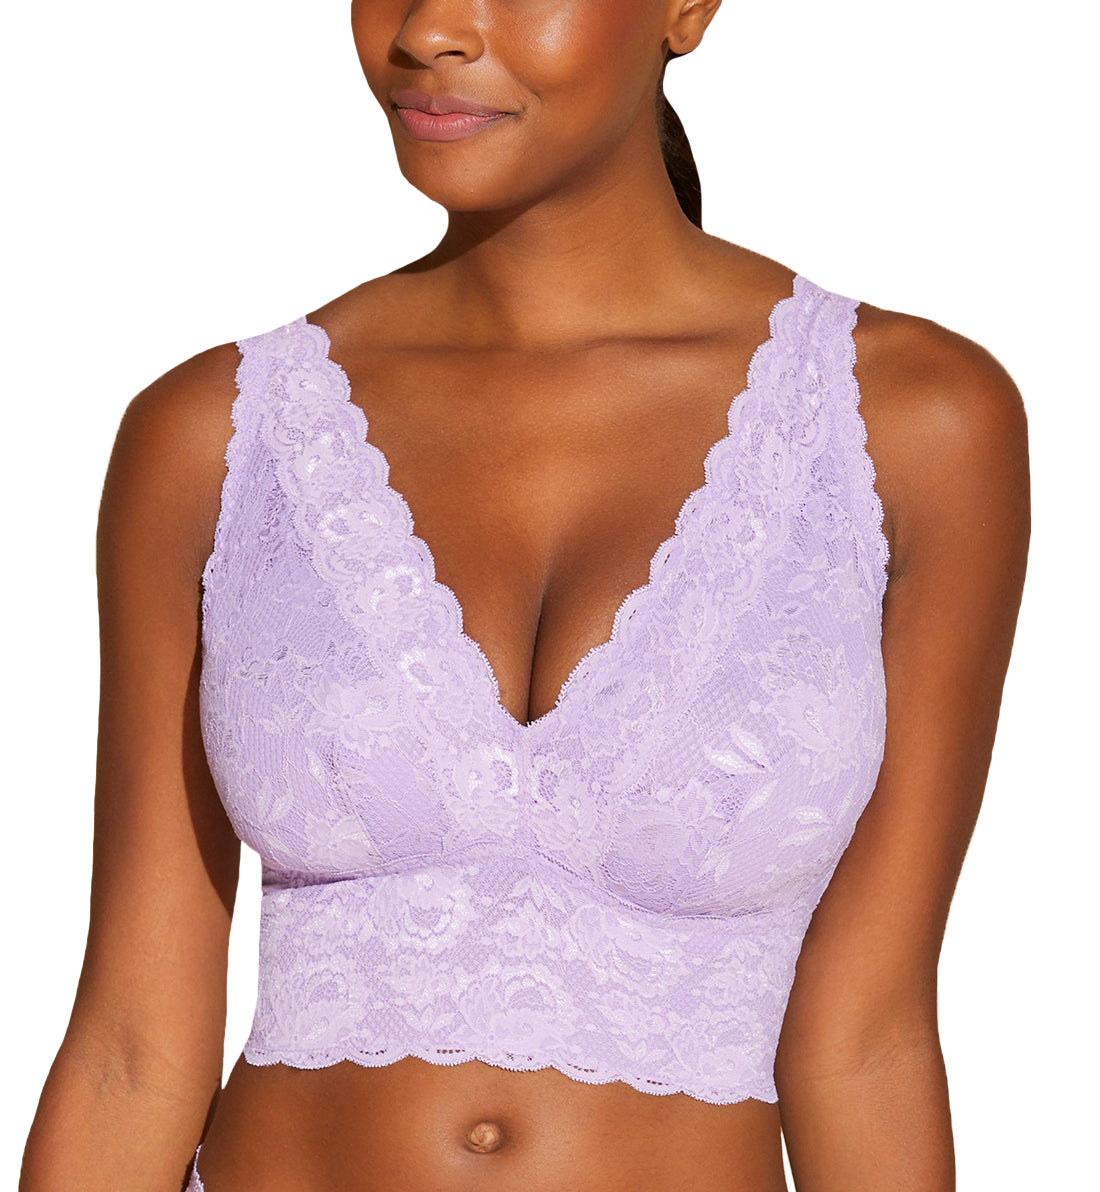 Cosabella Never Say Never CURVY Plungie Longline Bralette (NEVER1385),XS,Icy Violet - Icy Violet,XS